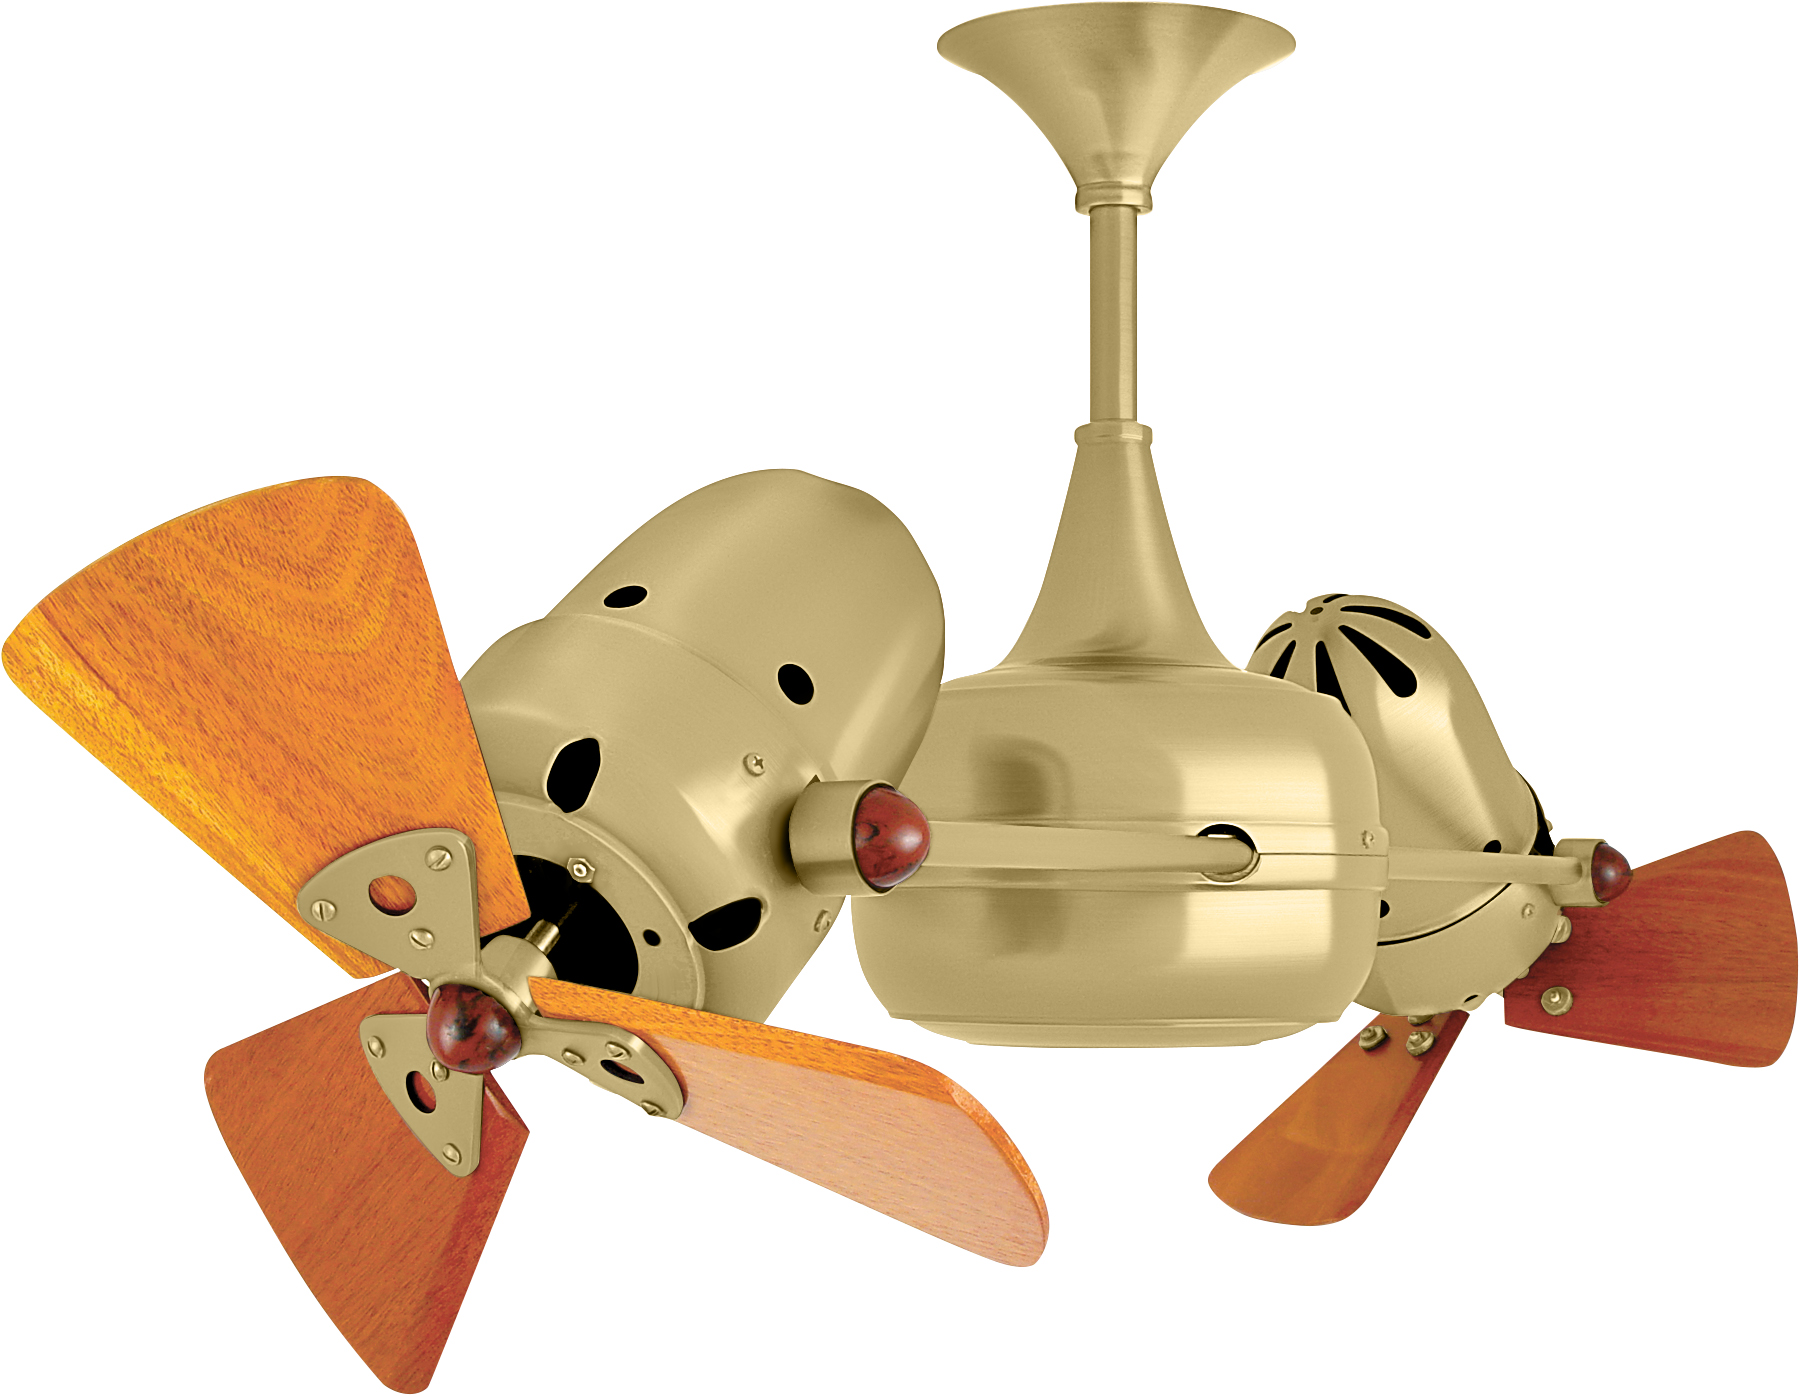 Duplo Dinamico rotational dual head ceiling fan in Brushed Brass finish with Mahogany wood blades made by Matthews Fan Company.